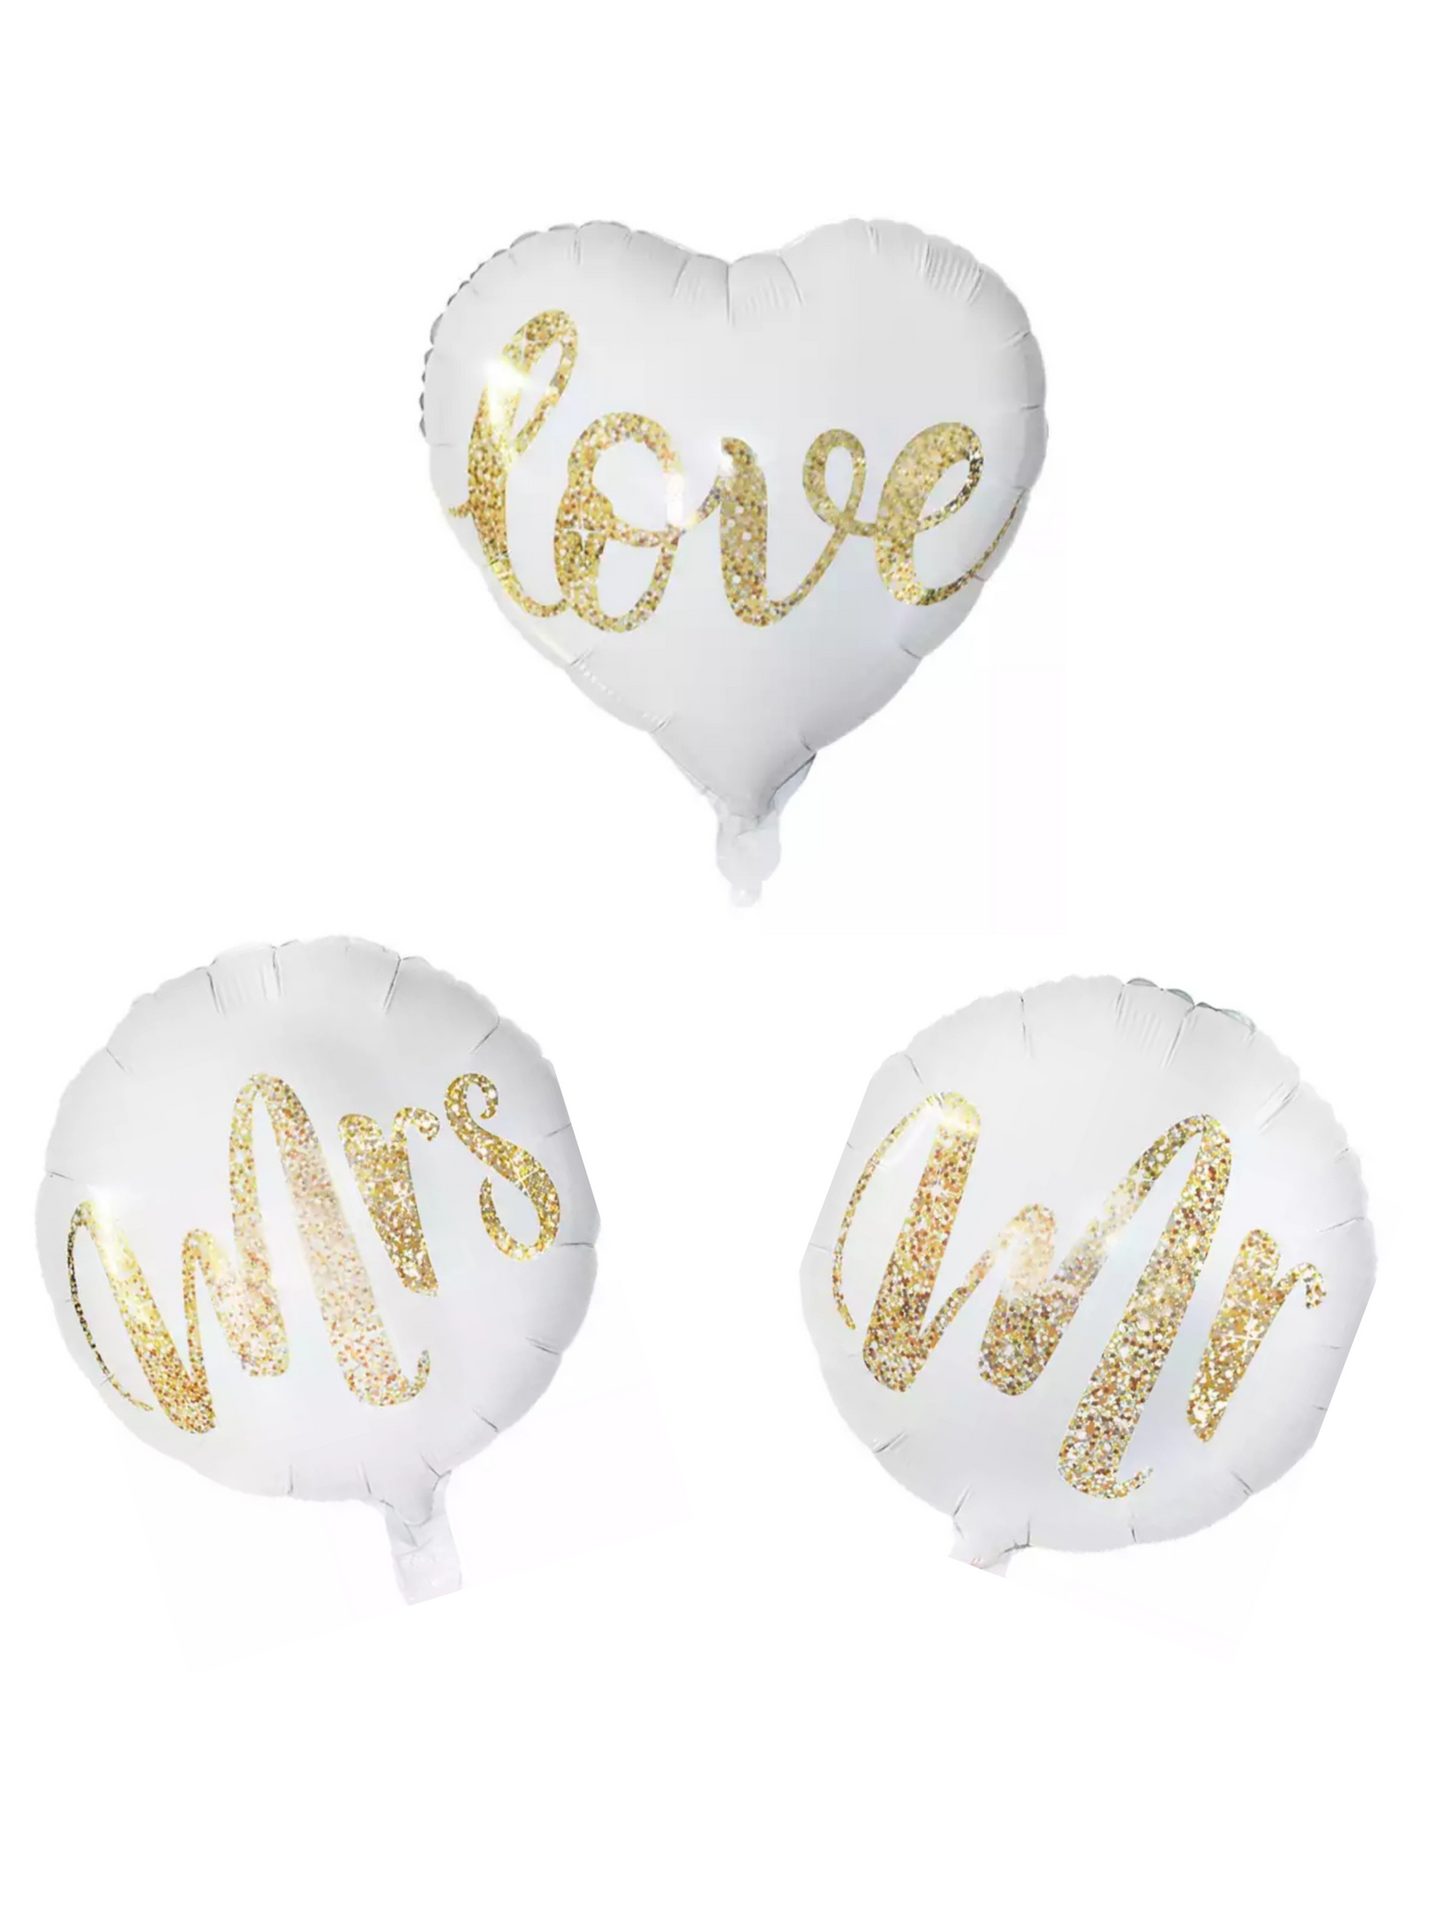 Mr, Mrs and Love Foil Balloons - Queen of the Castle Emporium